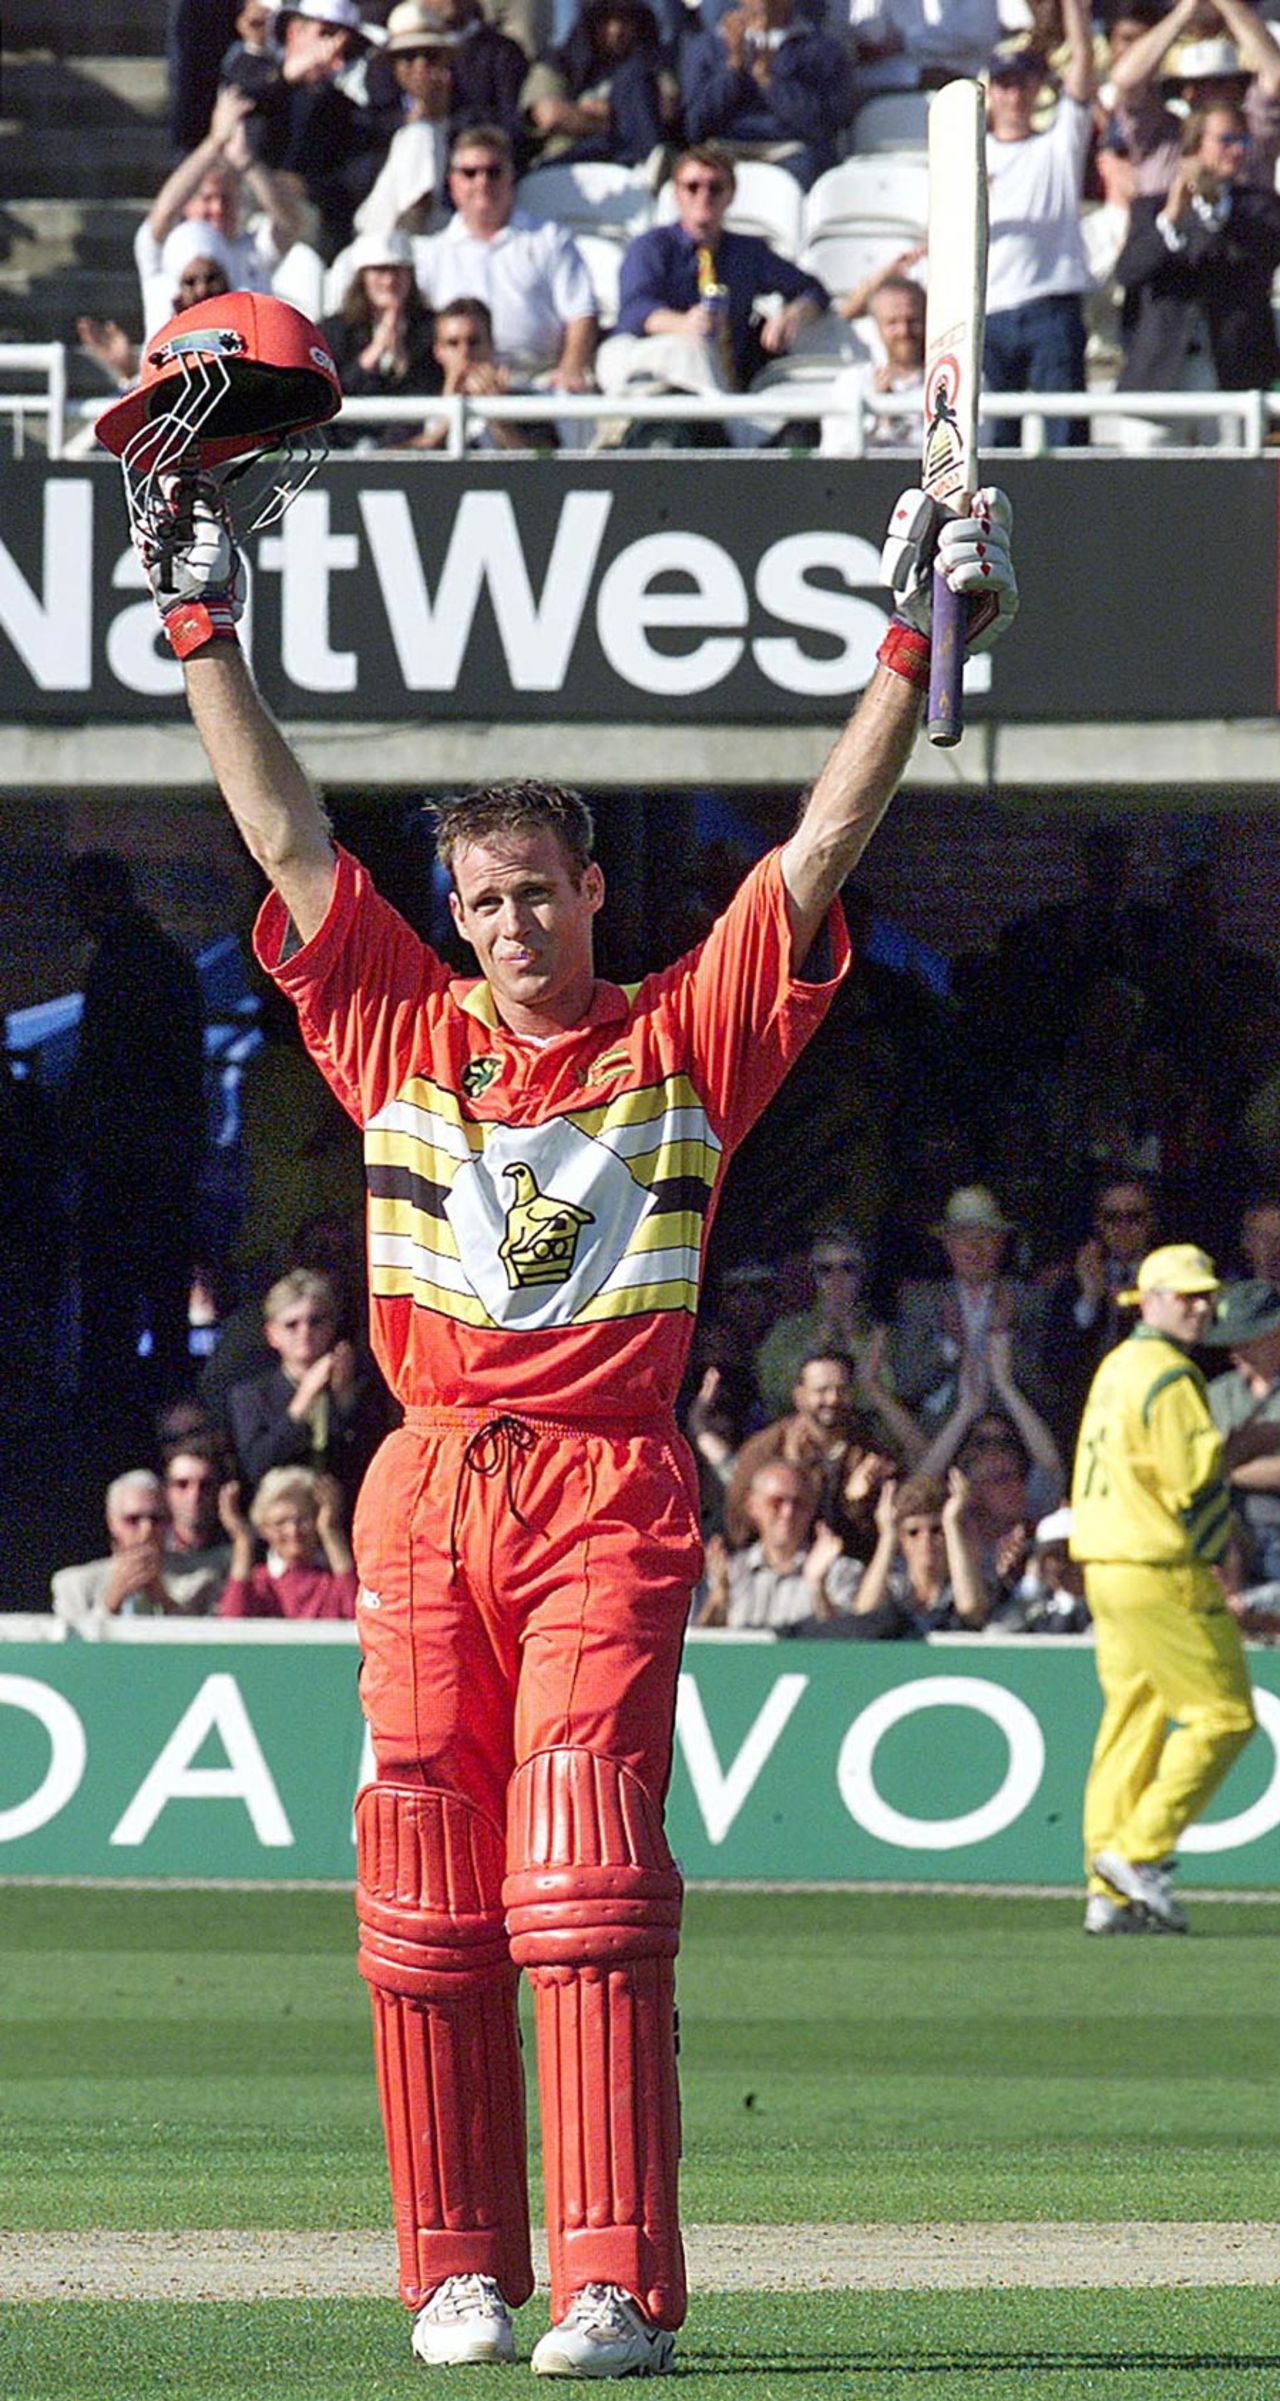 A century for Neil Johnson at Lord's, 5th Super Six match: Australia v Zimbabwe, World Cup, Lord's, June 9, 1999